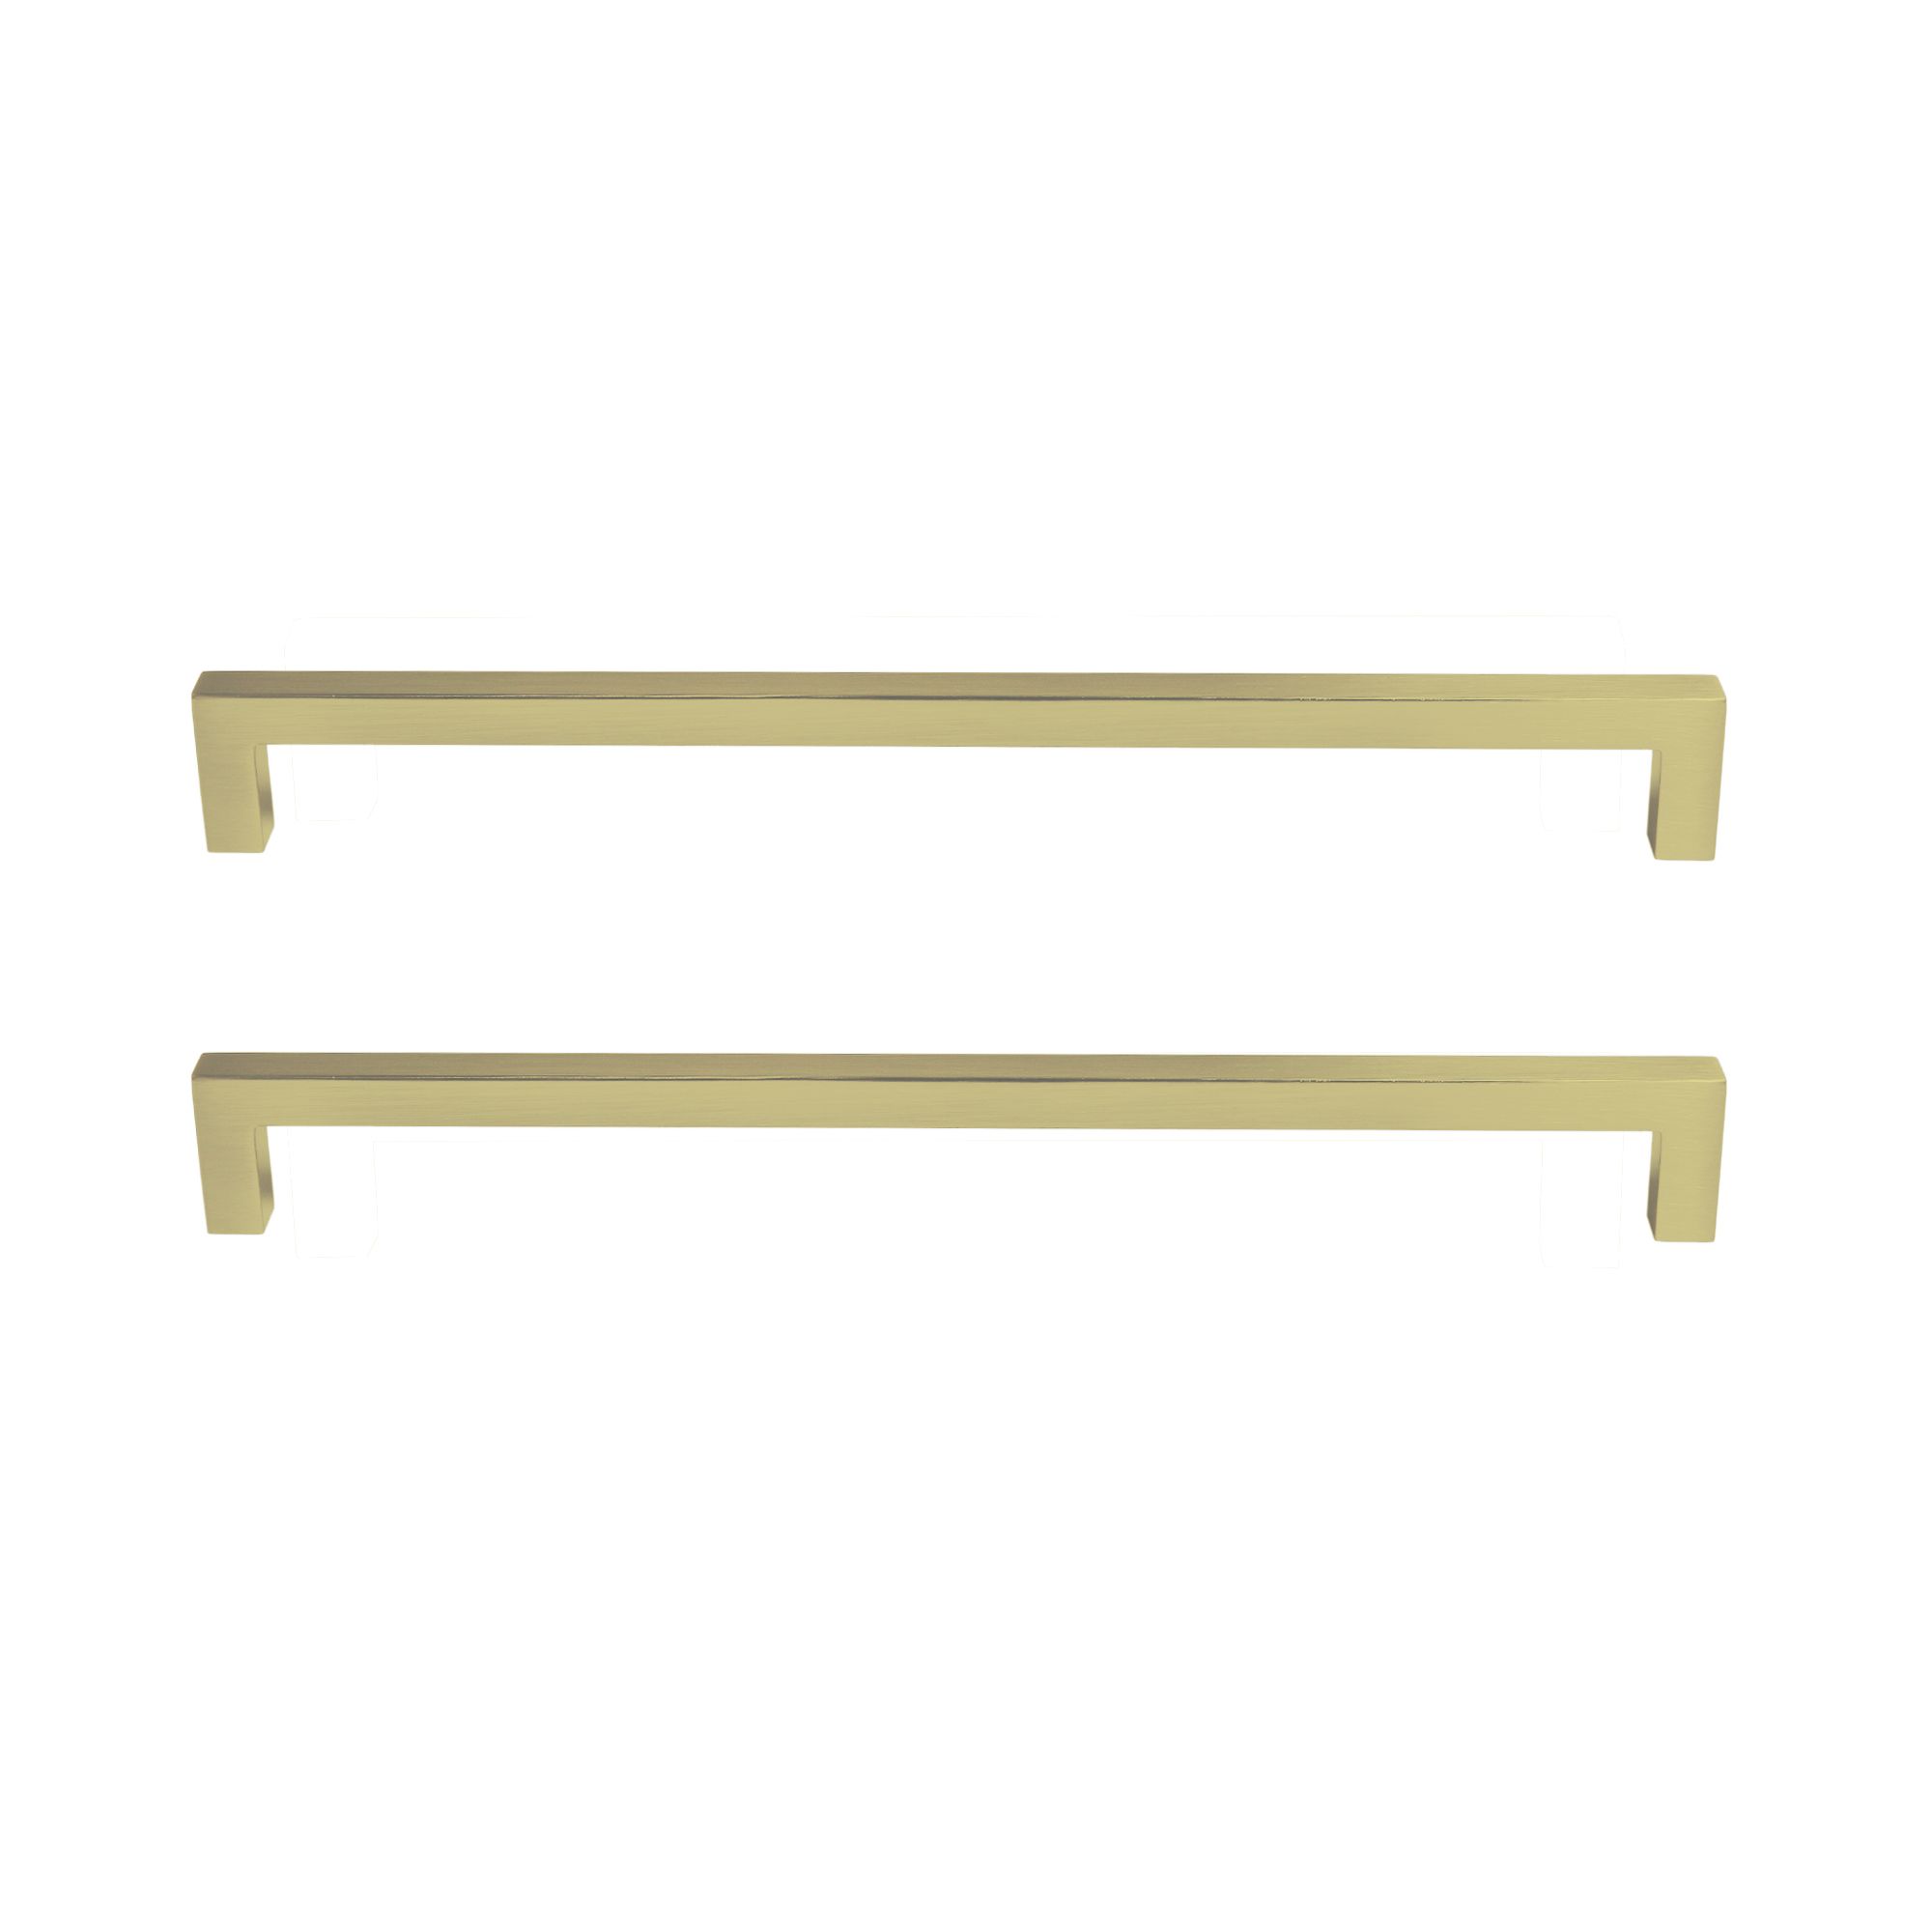 GoodHome Golpar Brass effect Kitchen cabinets Handle (L)23.3cm, Pack of 2